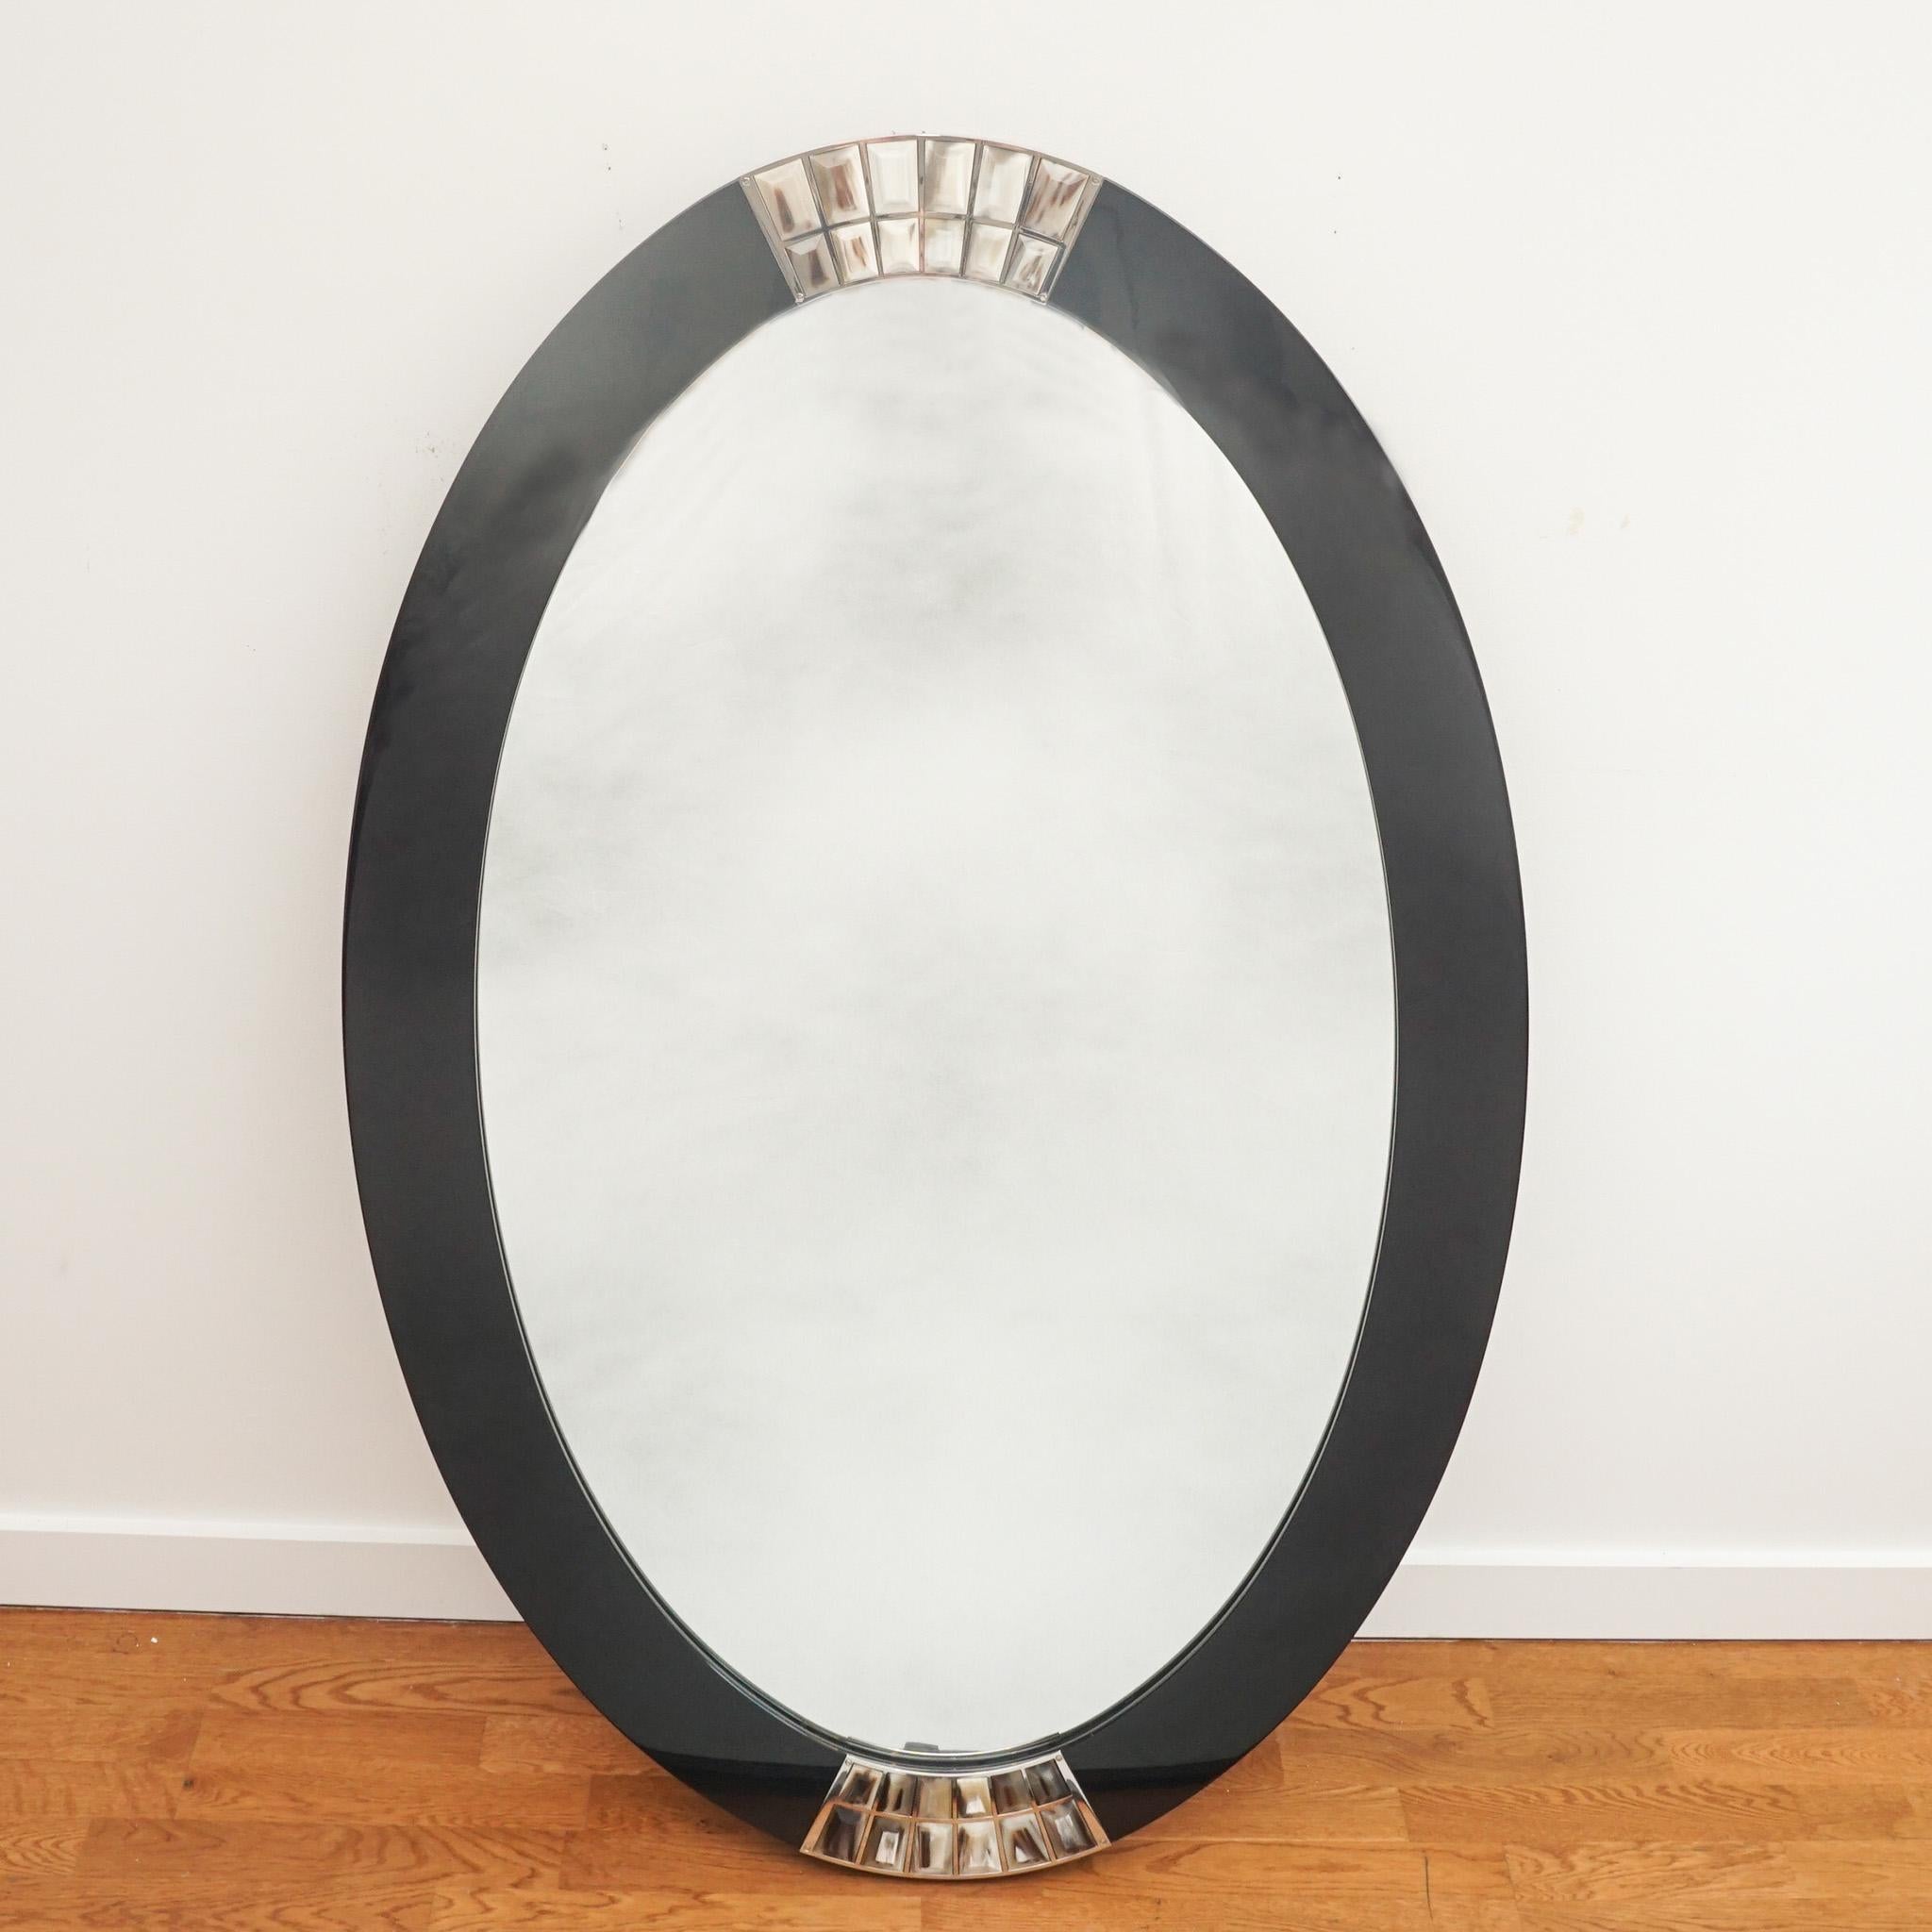 This exquisite Arcahorn oval mirror exemplifies the quality craftsmanship and luxurious finishes for which the company is known.  Featuring a black lacquer frame detailed top and bottom with natural horn, it is certain to make a statement wherever